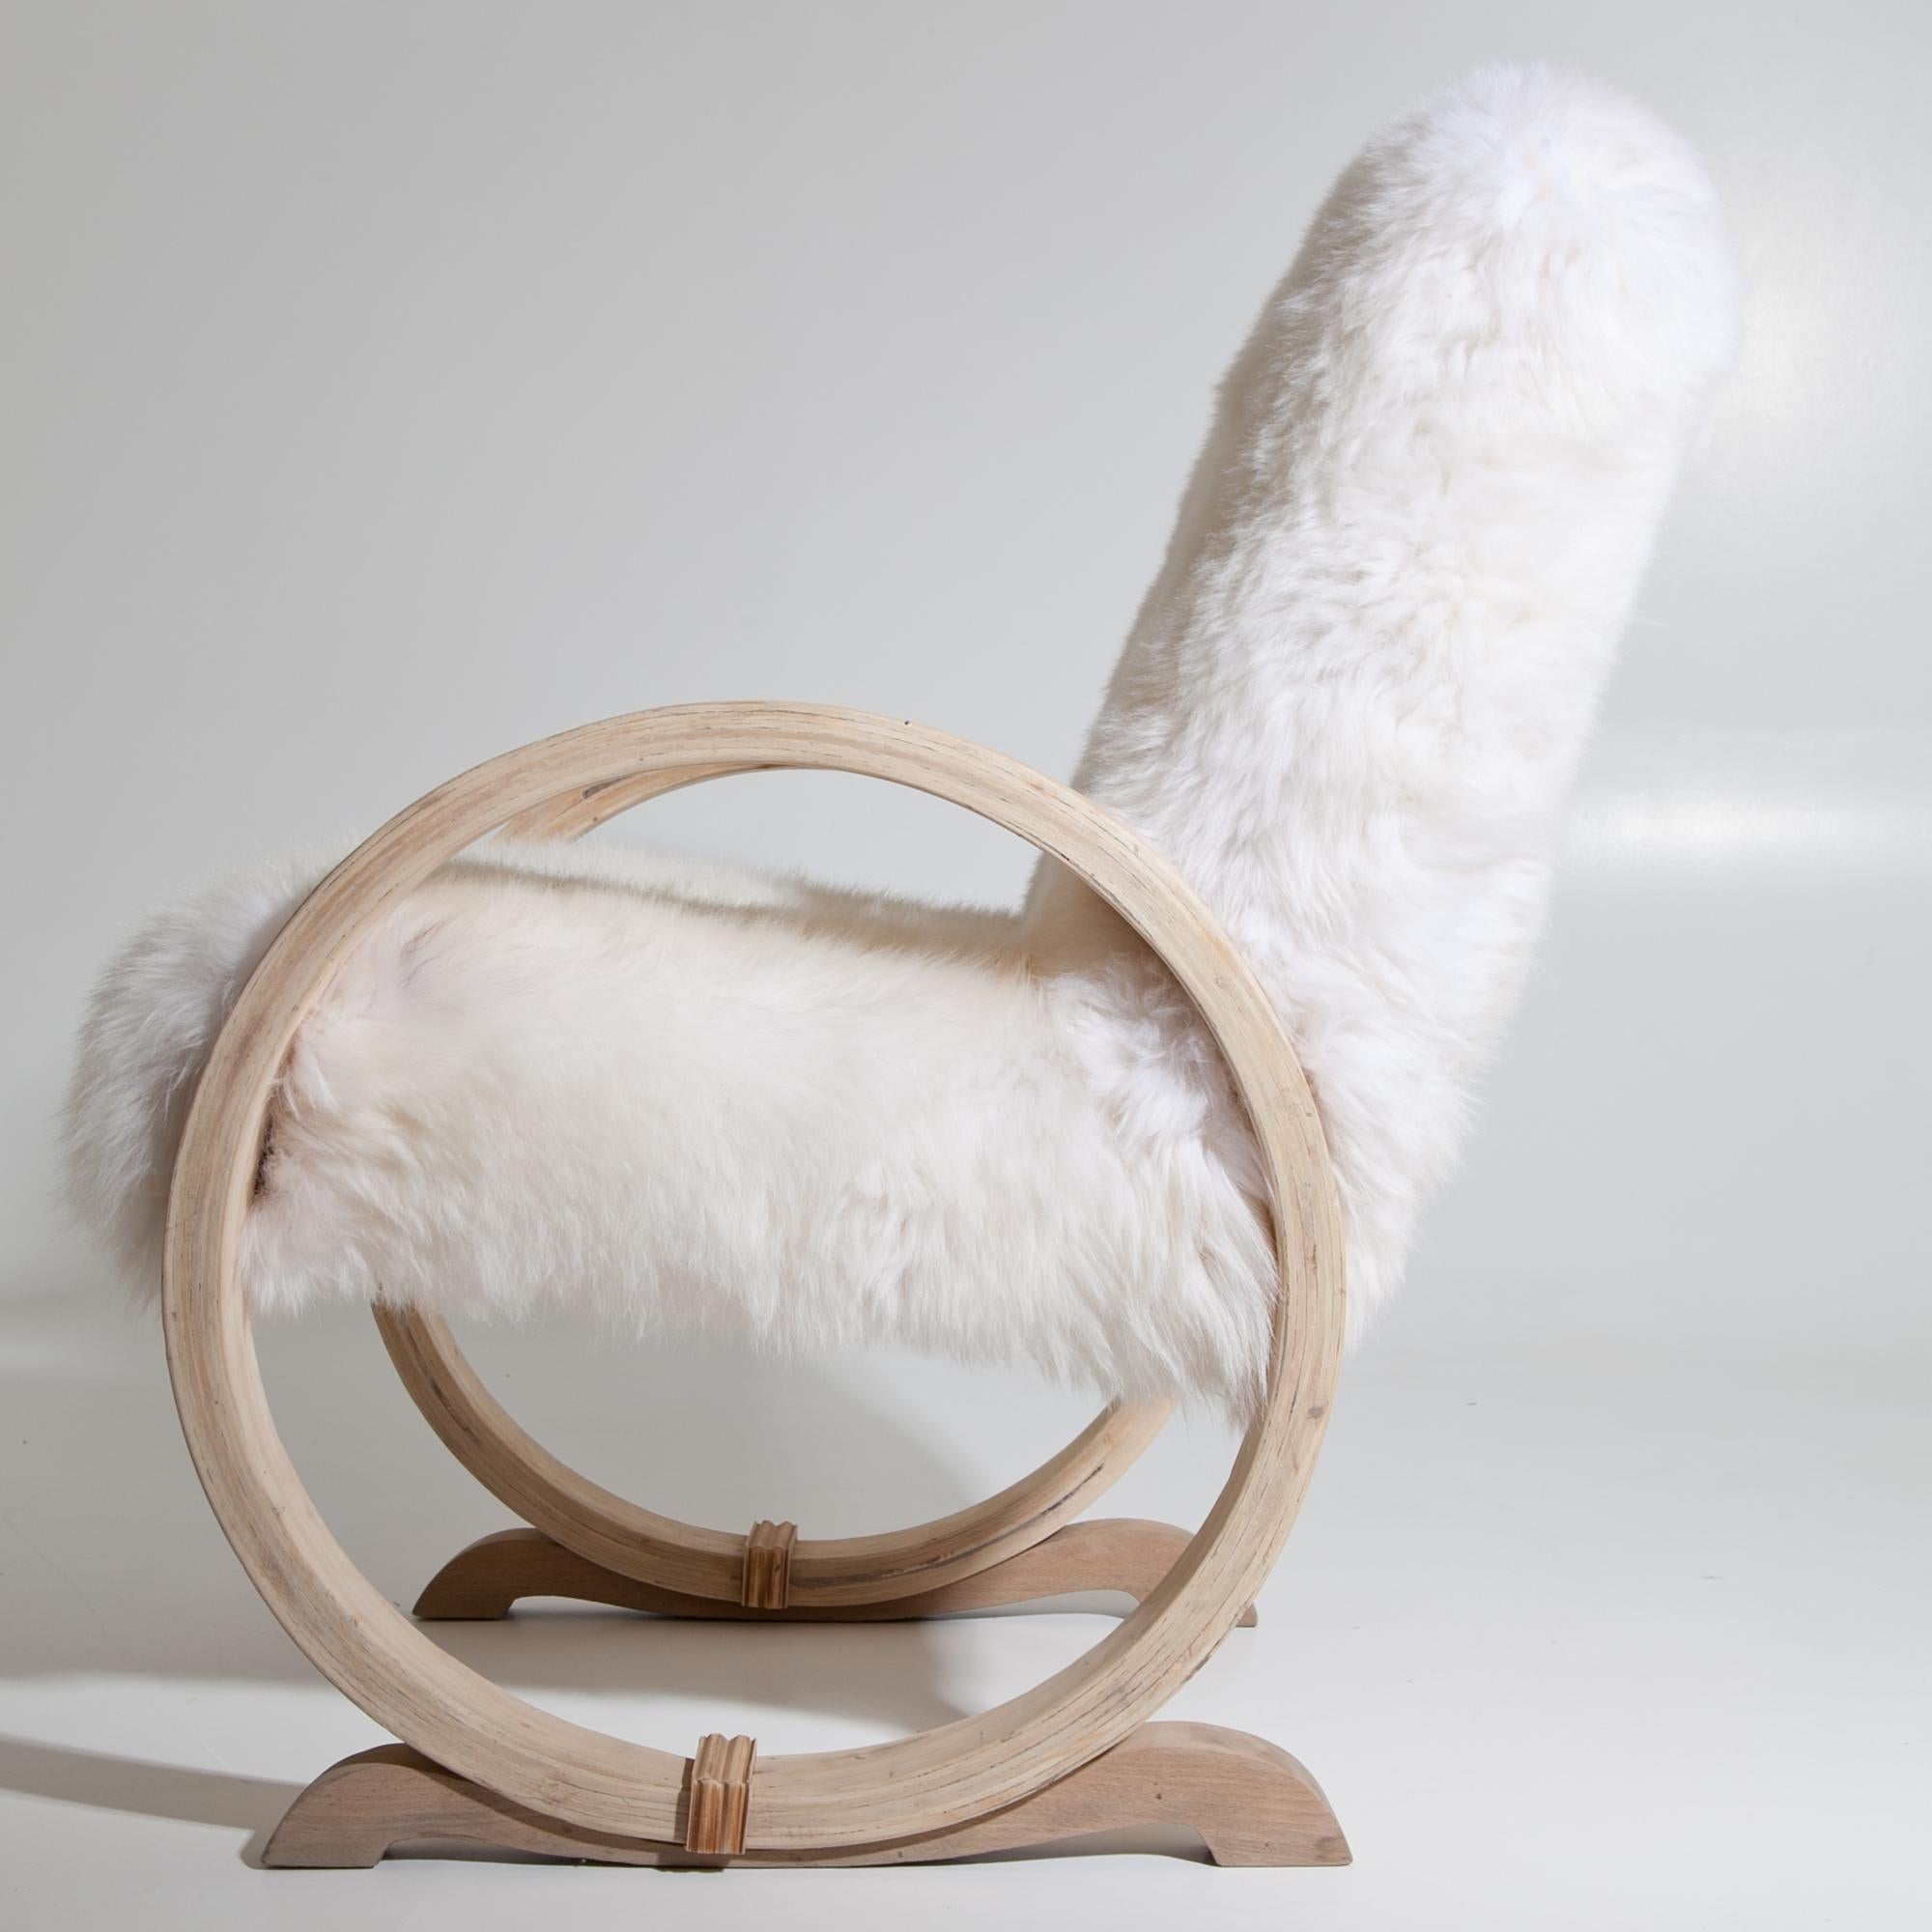 Armchair standing on hoops that serve as armrests. Seat and backrest were reupholstered with a white sheepskin.